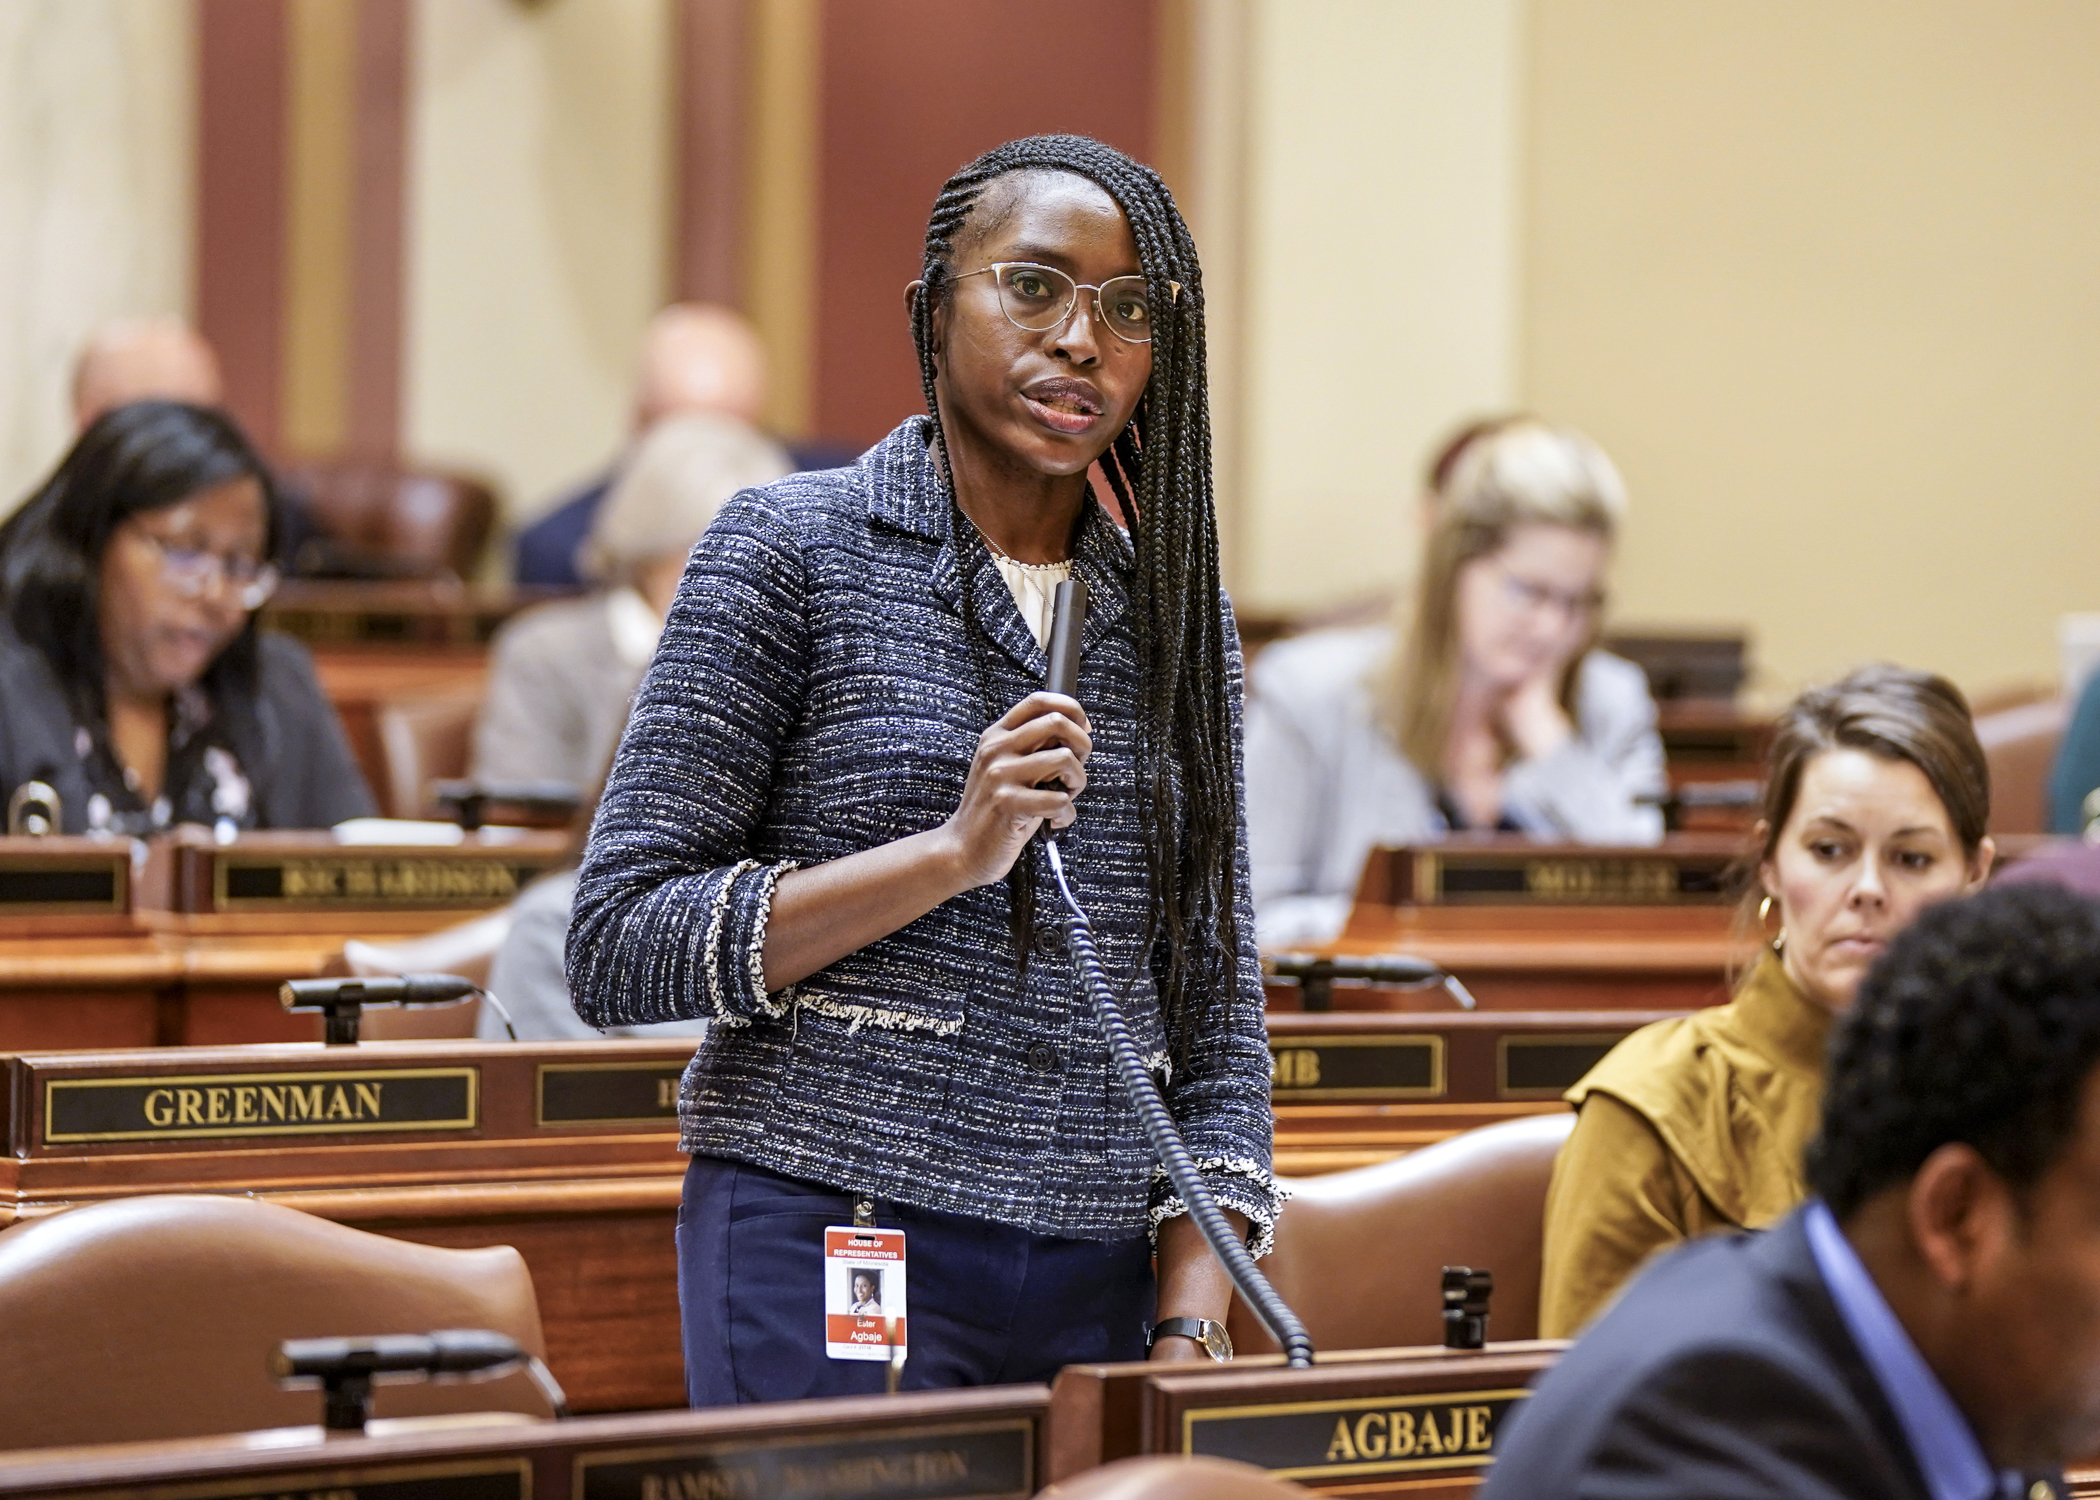 Rep. Esther Agbaje introduces HF37, the CROWN Act, which would prohibit discrimination based on traits associated with race, such as hair texture and hair styles. The bill passed on a 111-19 vote Jan. 11. (Photo by Catherine Davis)